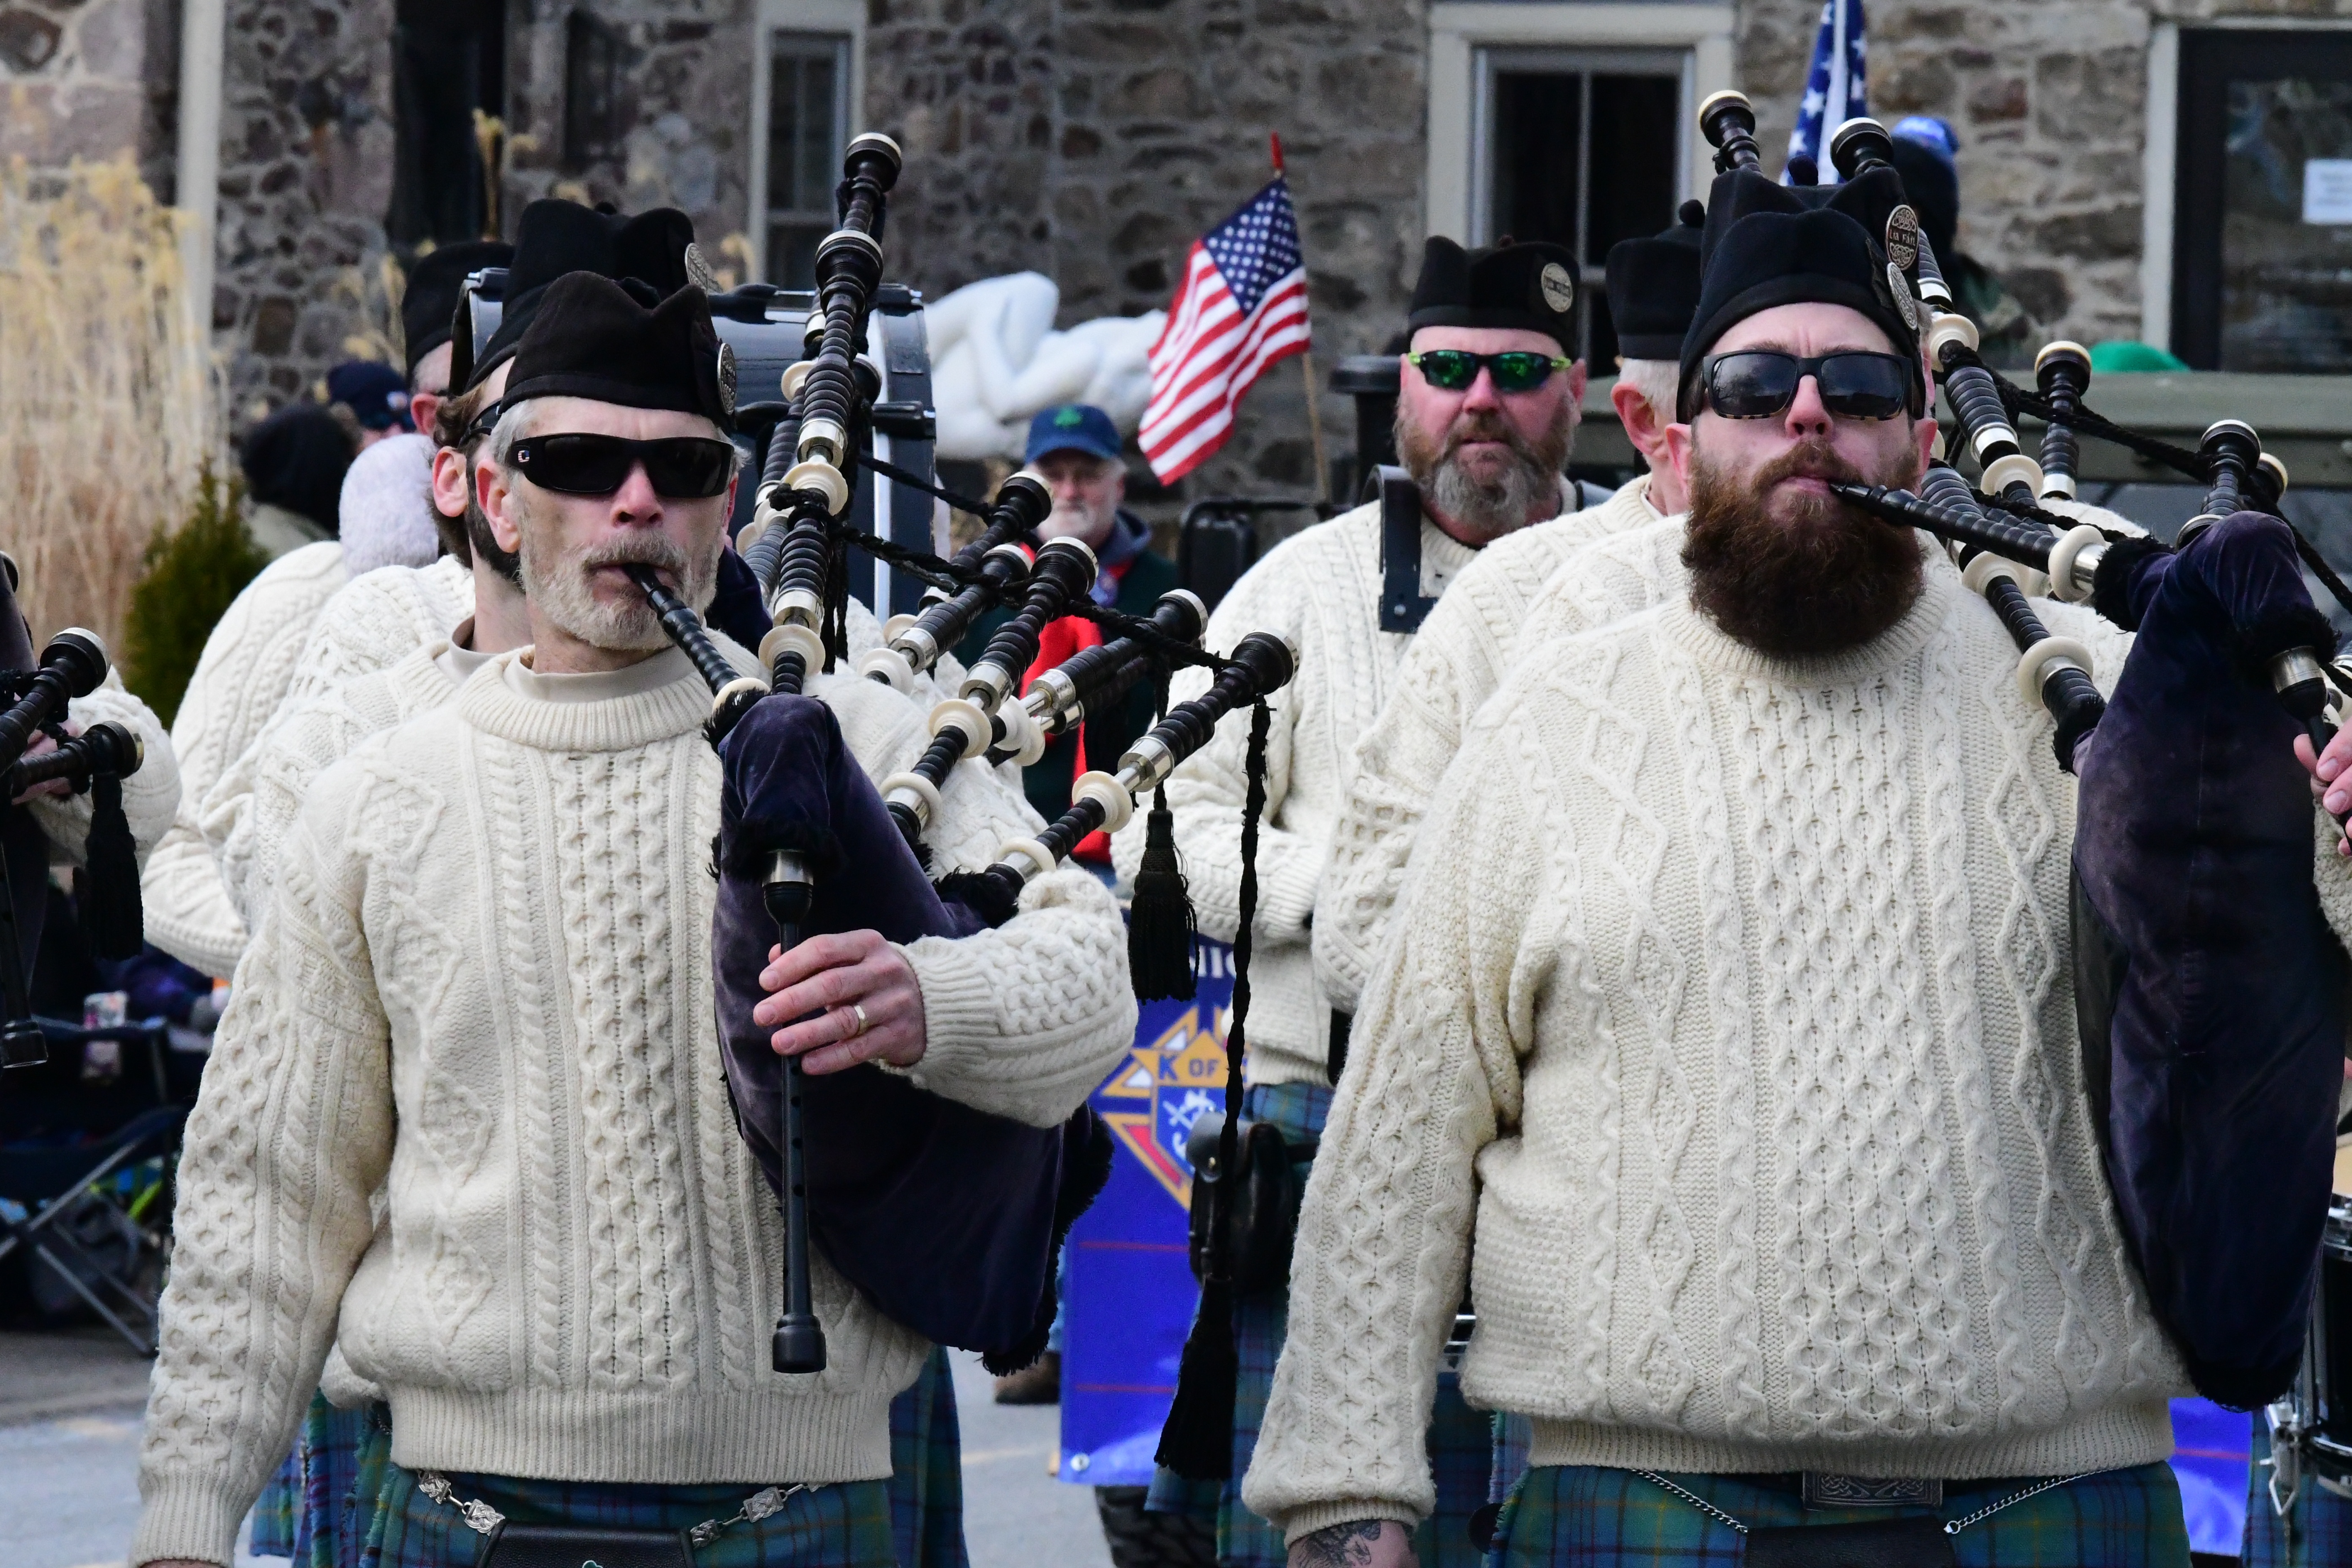 The 2022 St Patrick's Day Parade hosted by the Friendly Sons of St Patrick Hunterdon County took place in Clinton on March 13. Here, the Lia Fáil Pipe Band.